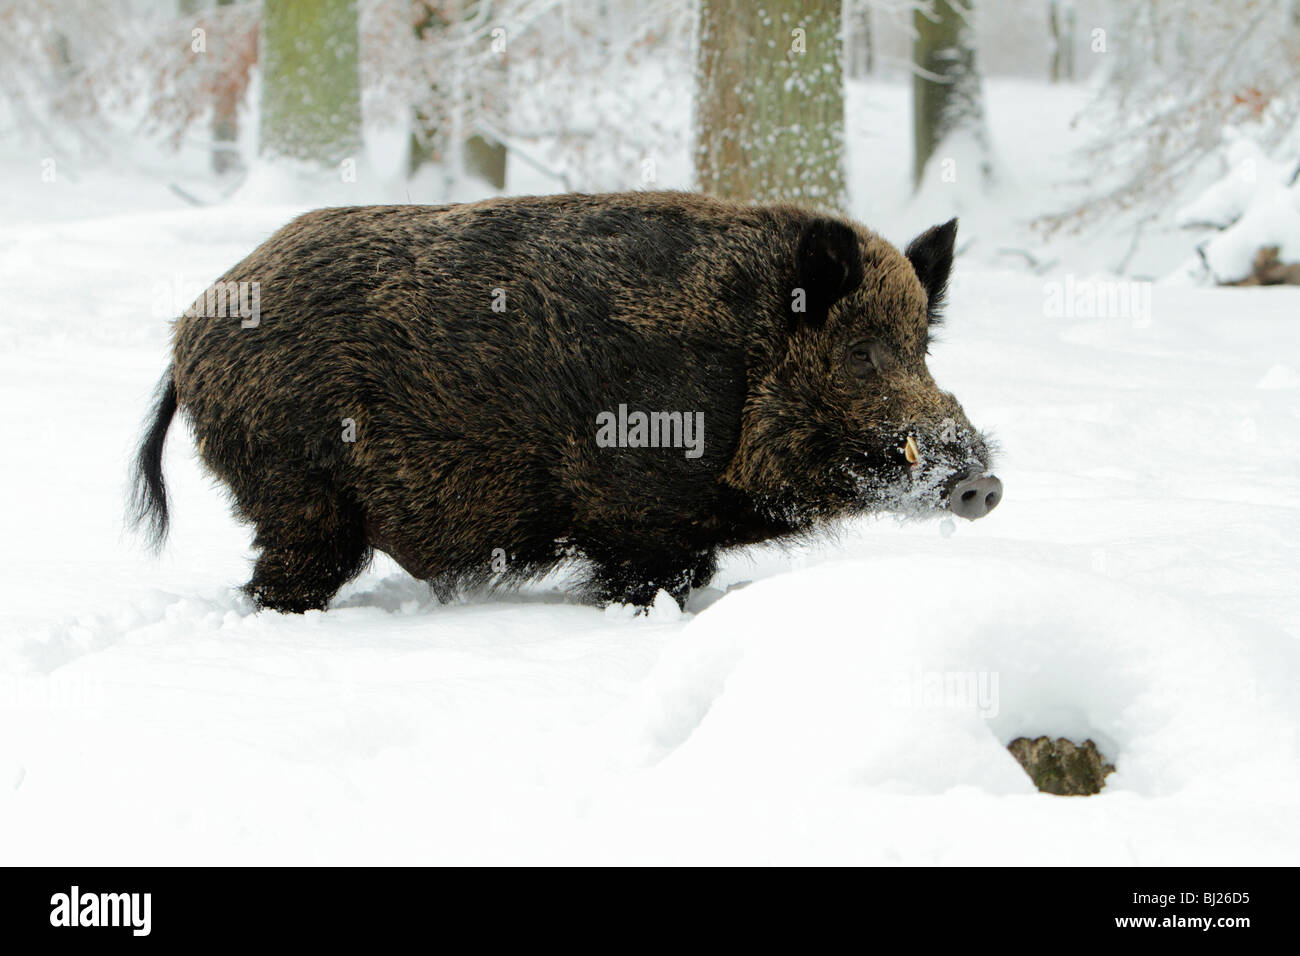 Wild Boar, Sus Scrofa, in snow covered forest, Germany Stock Photo